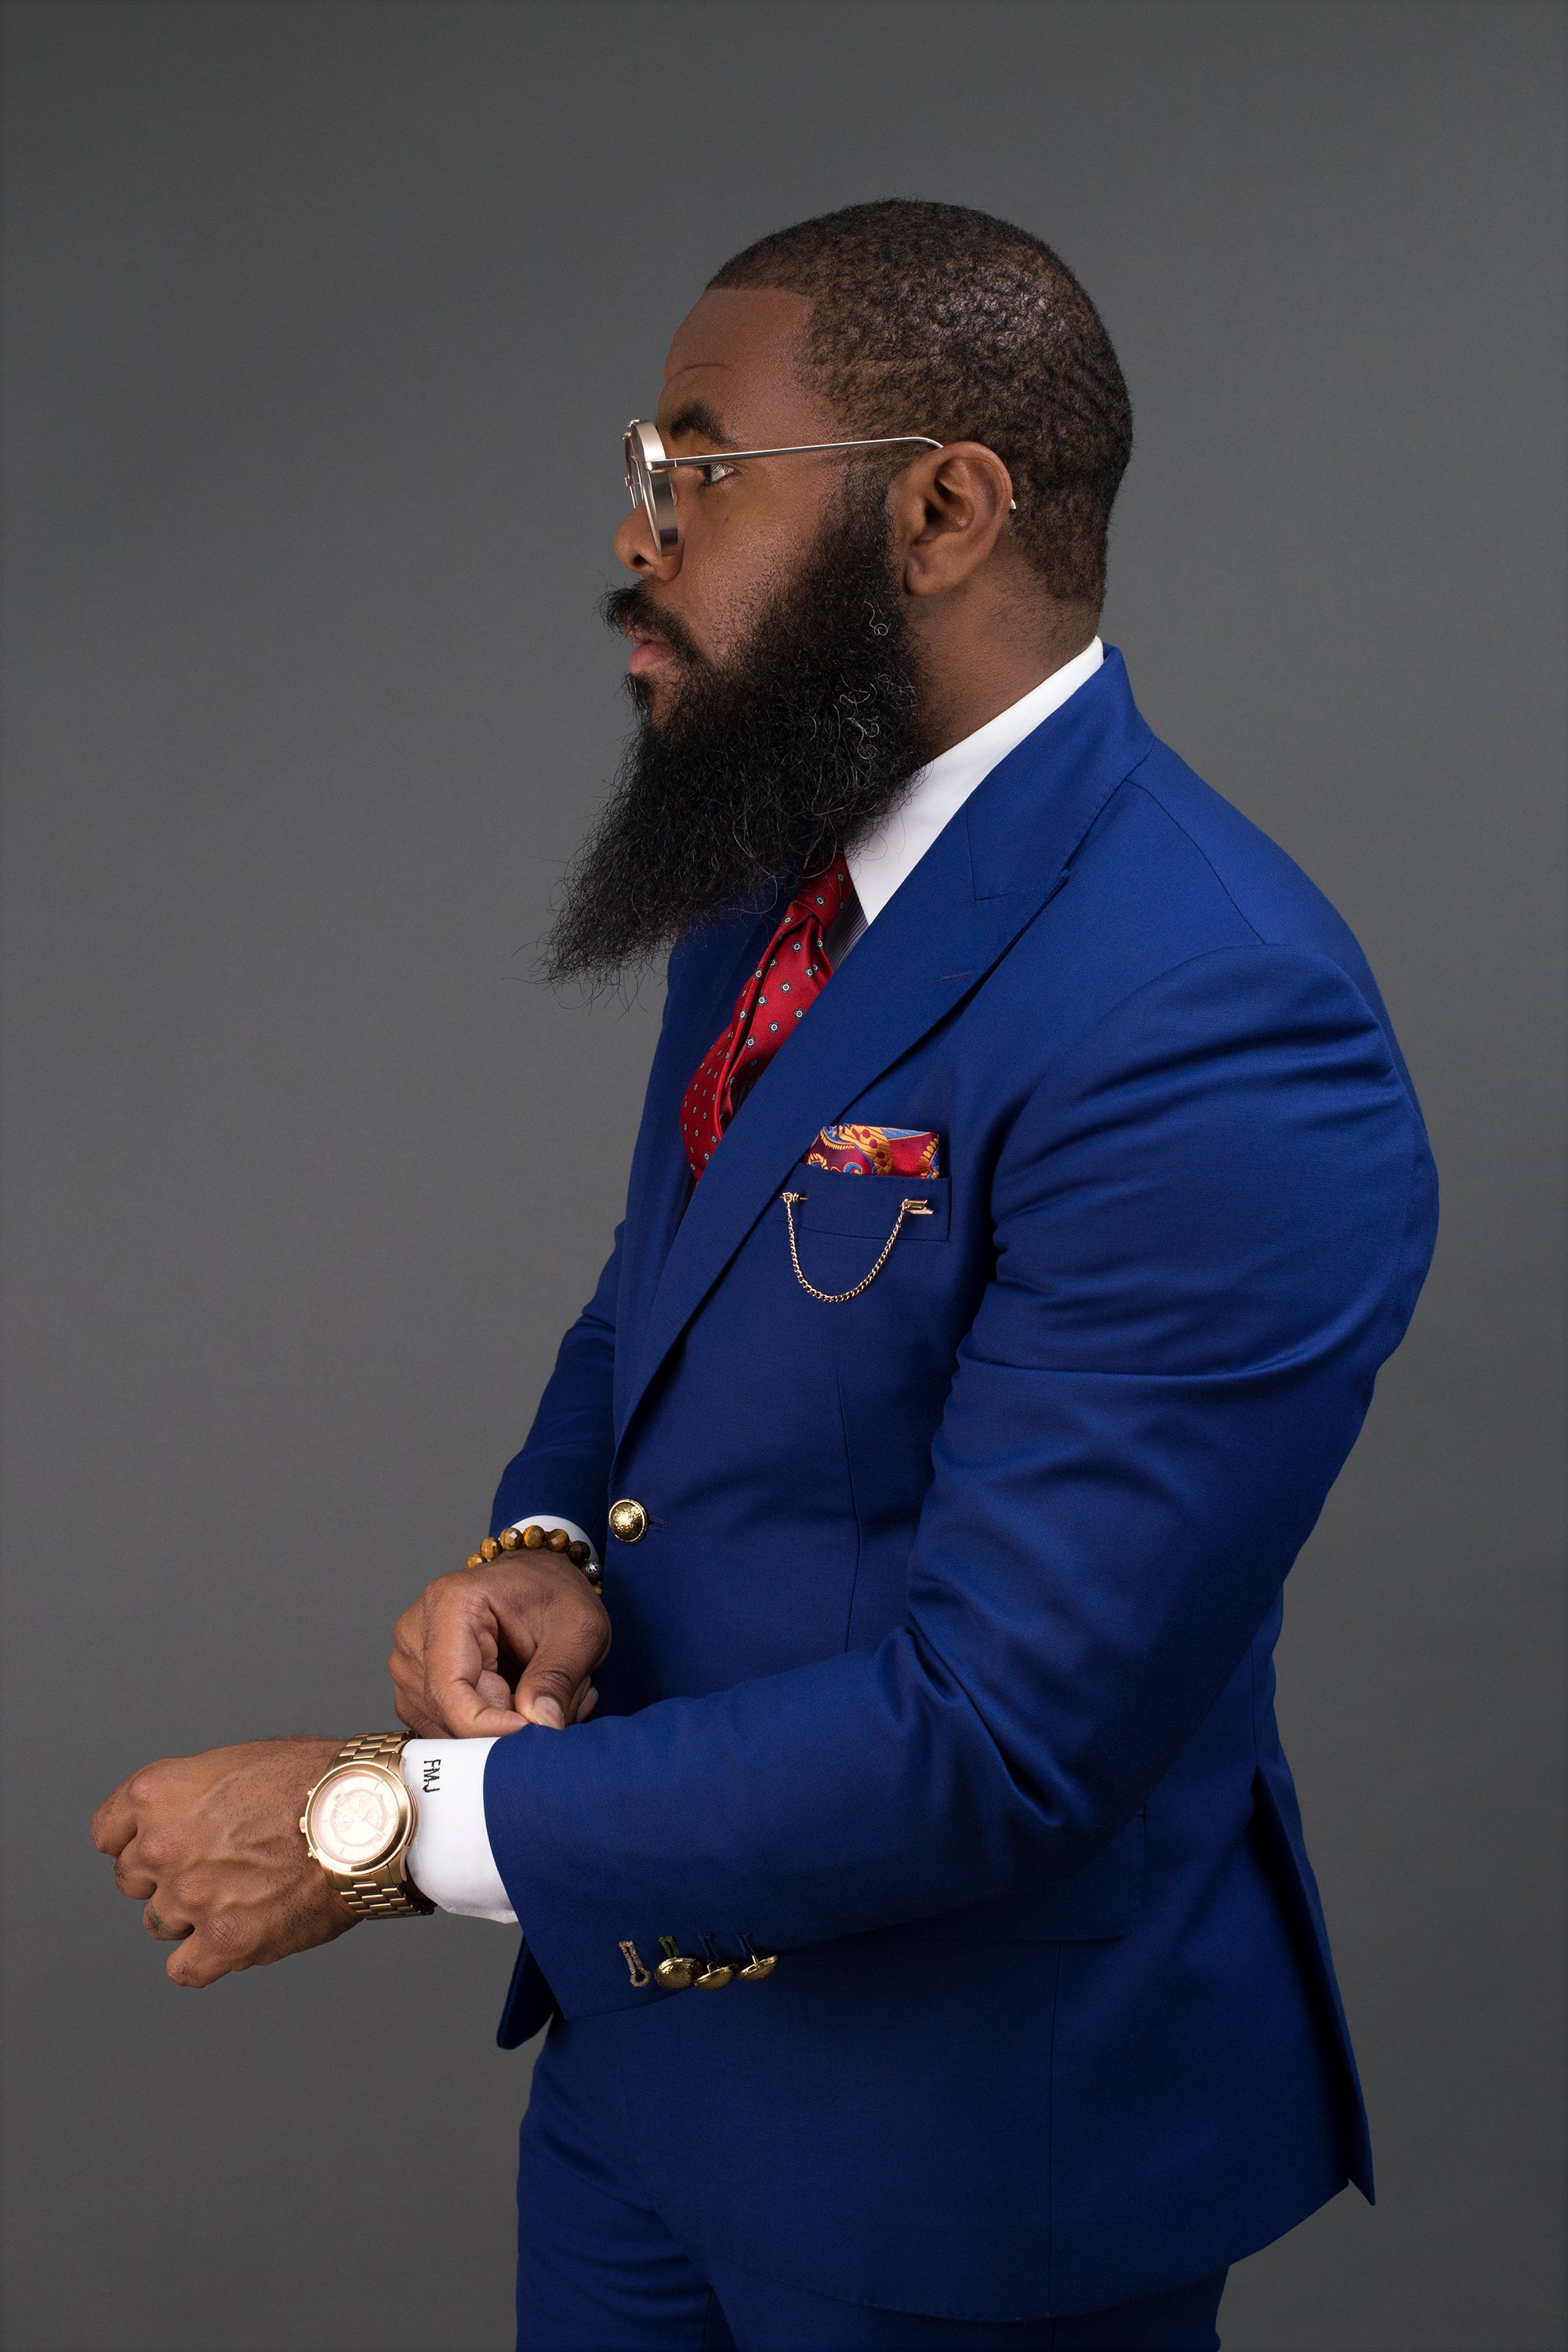 #MCE: These Black Men With Beards Are Here To Make Your Day
